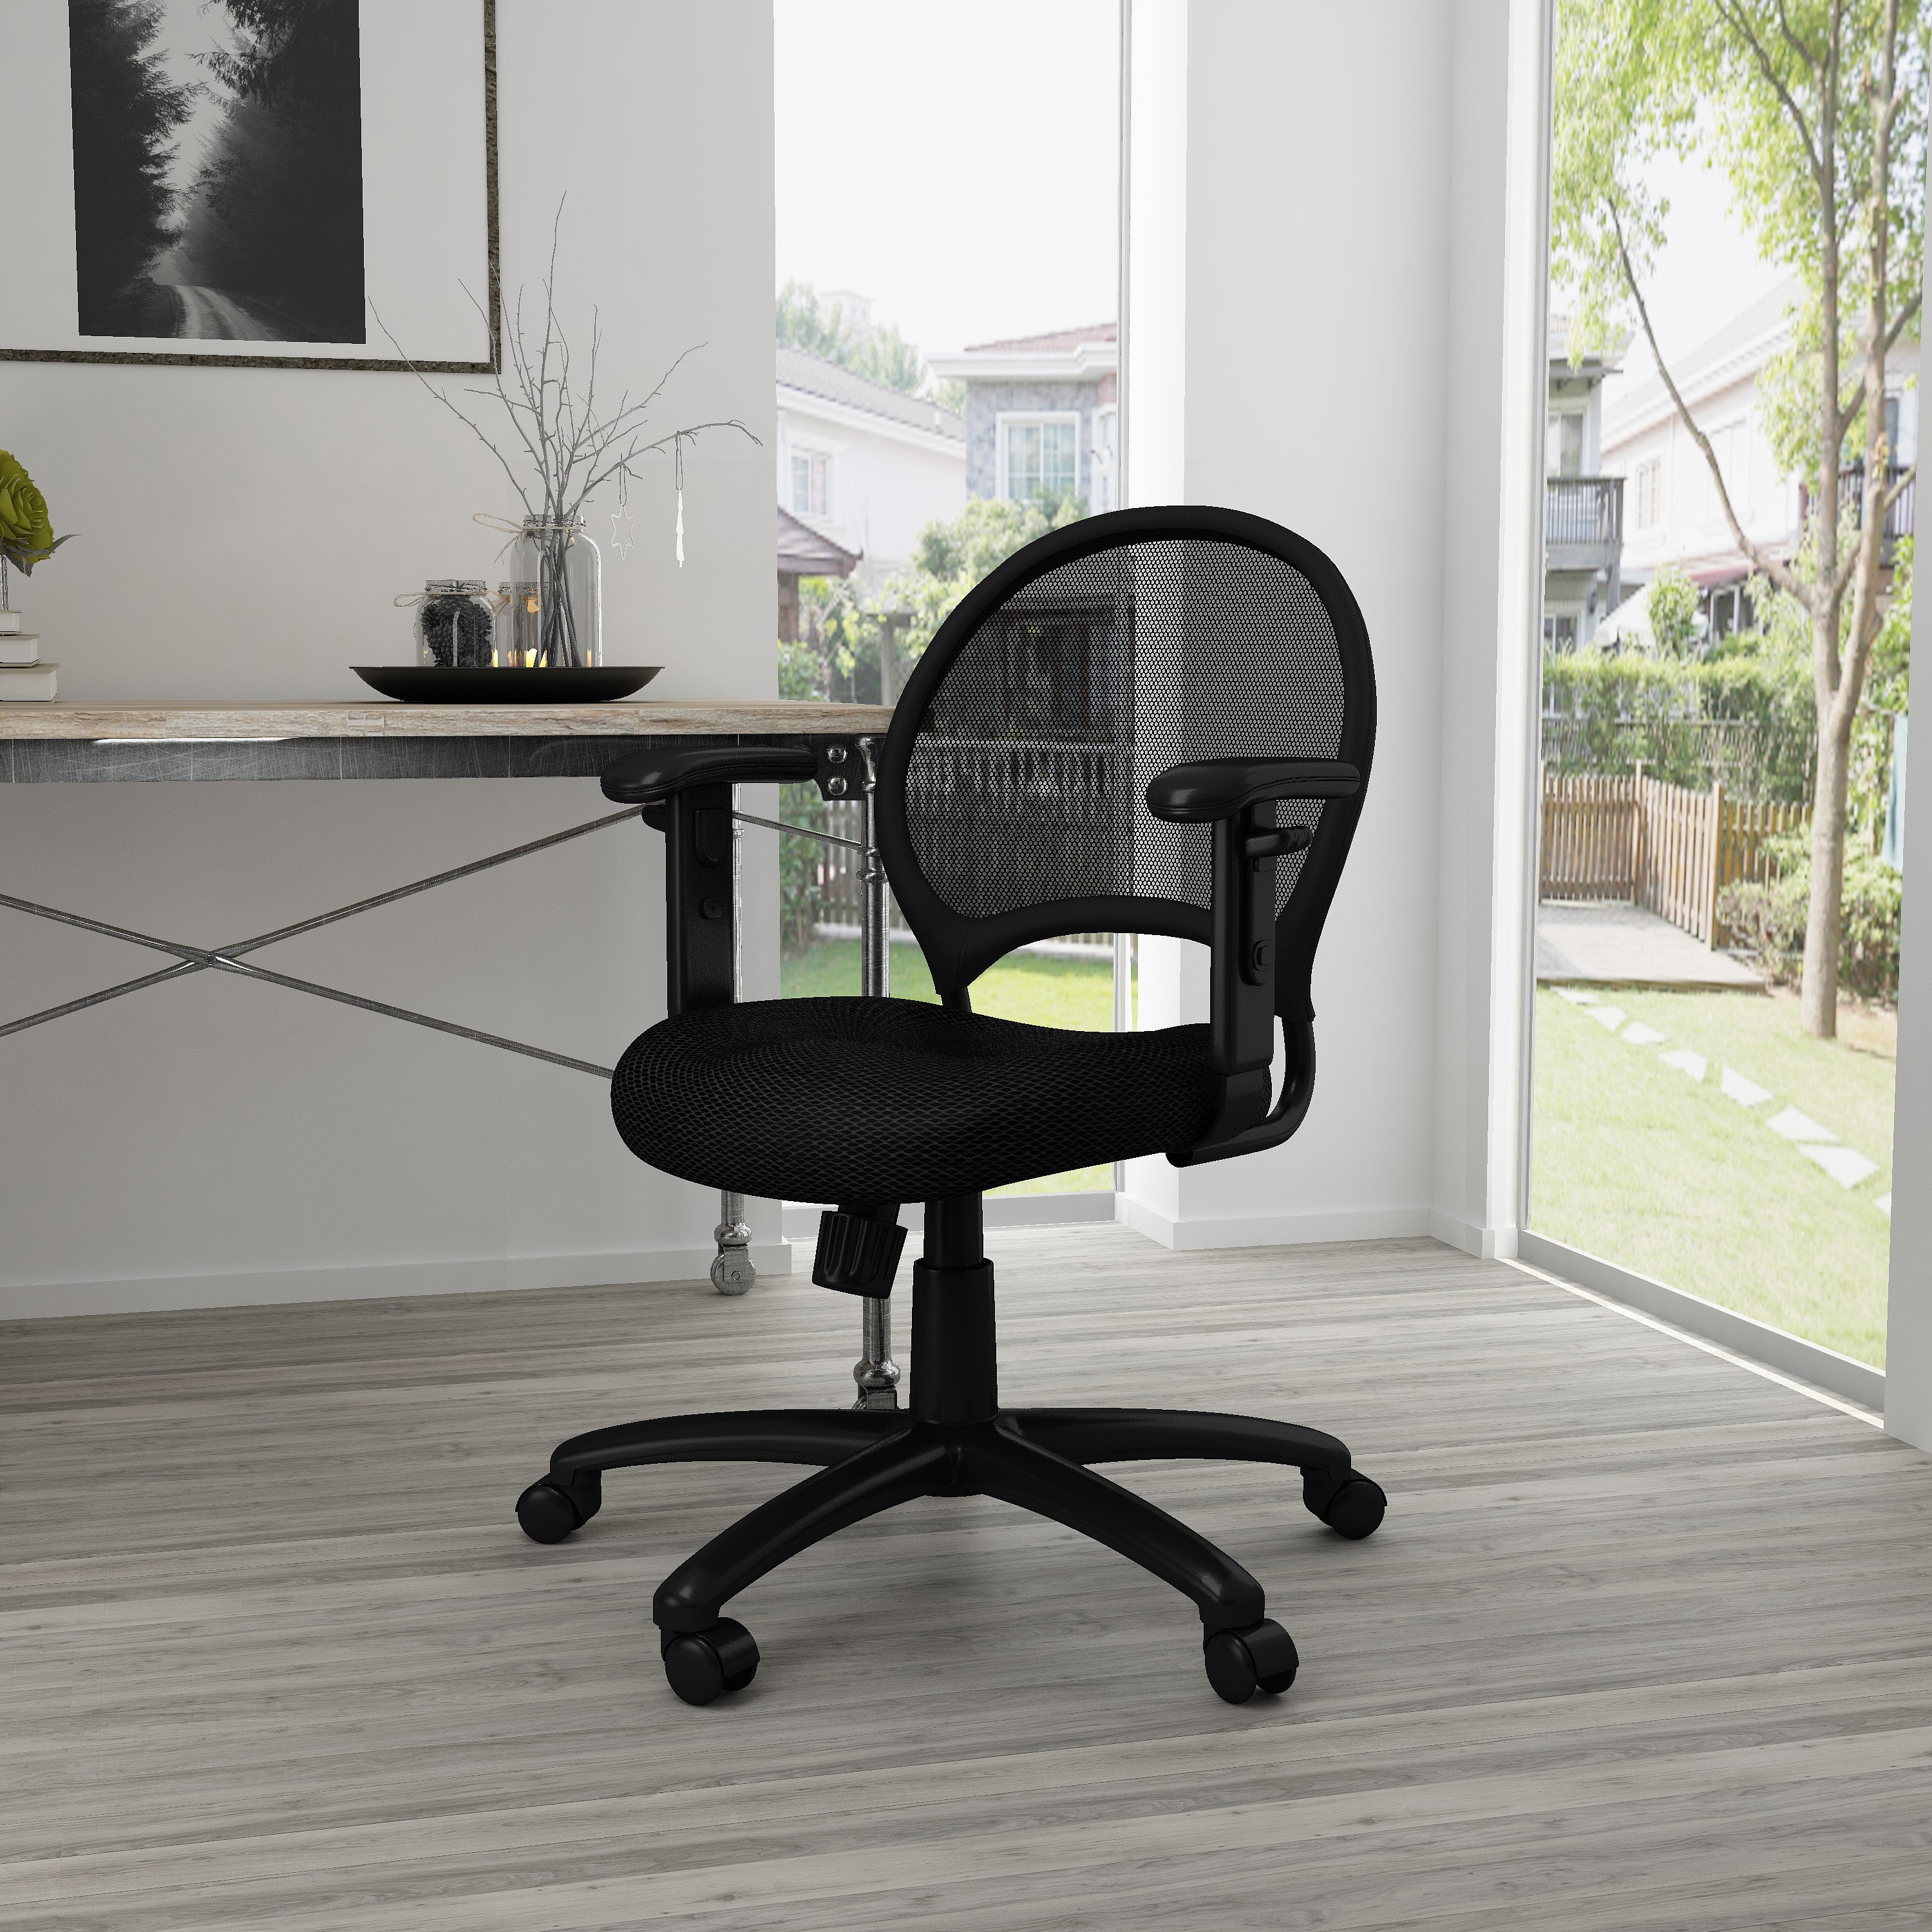 Mesh Chair With Adjustable Arms, B6216